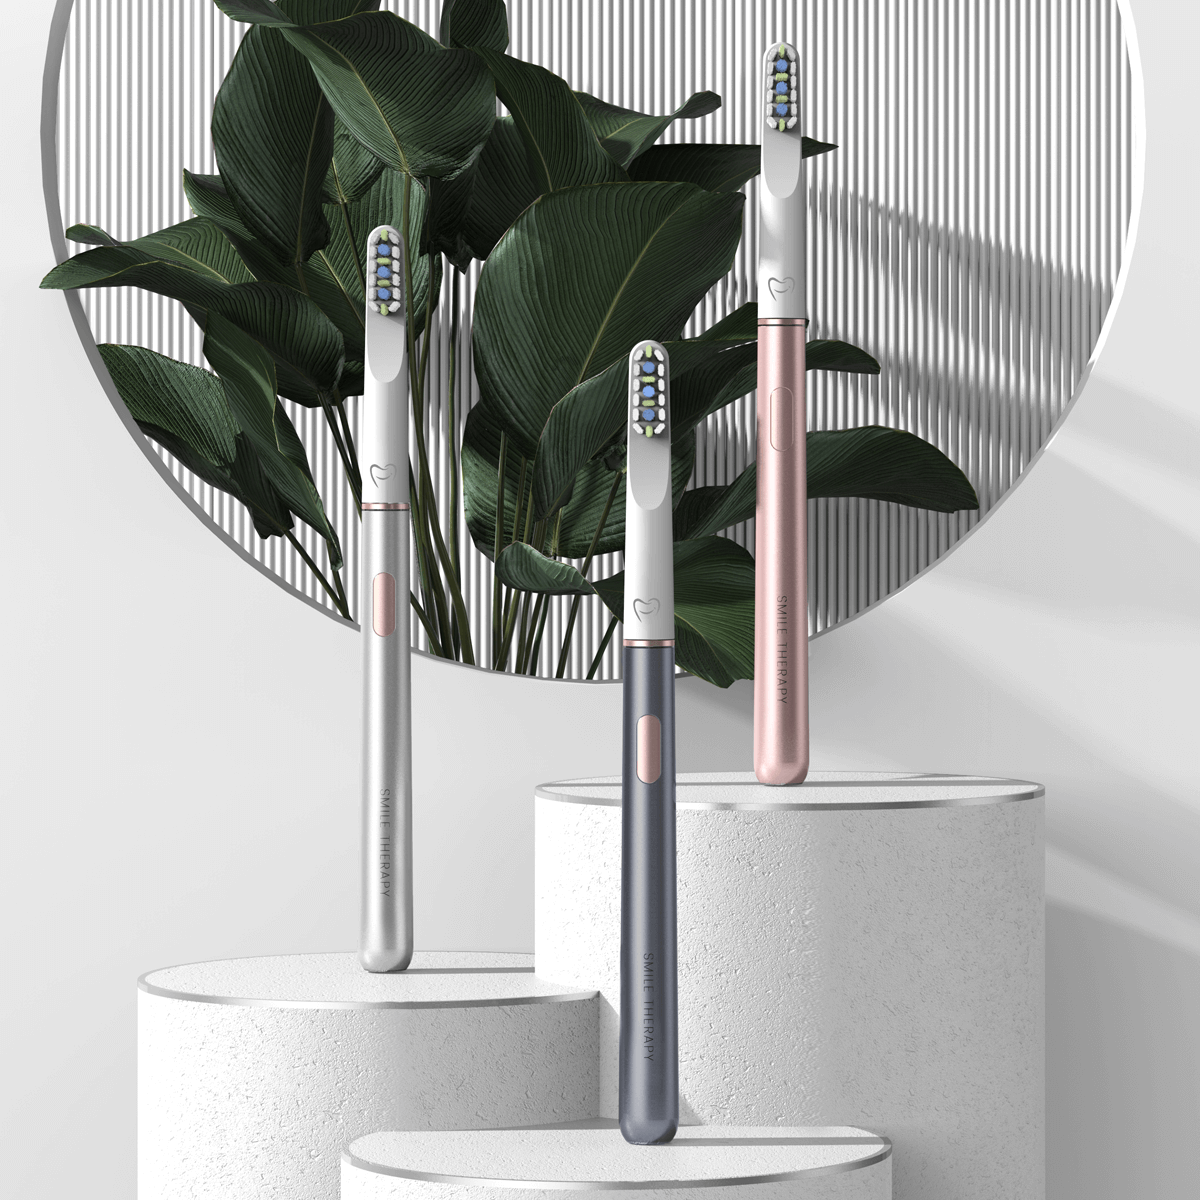 Air Advanced Electric Toothbrush 3-in-1 DP10